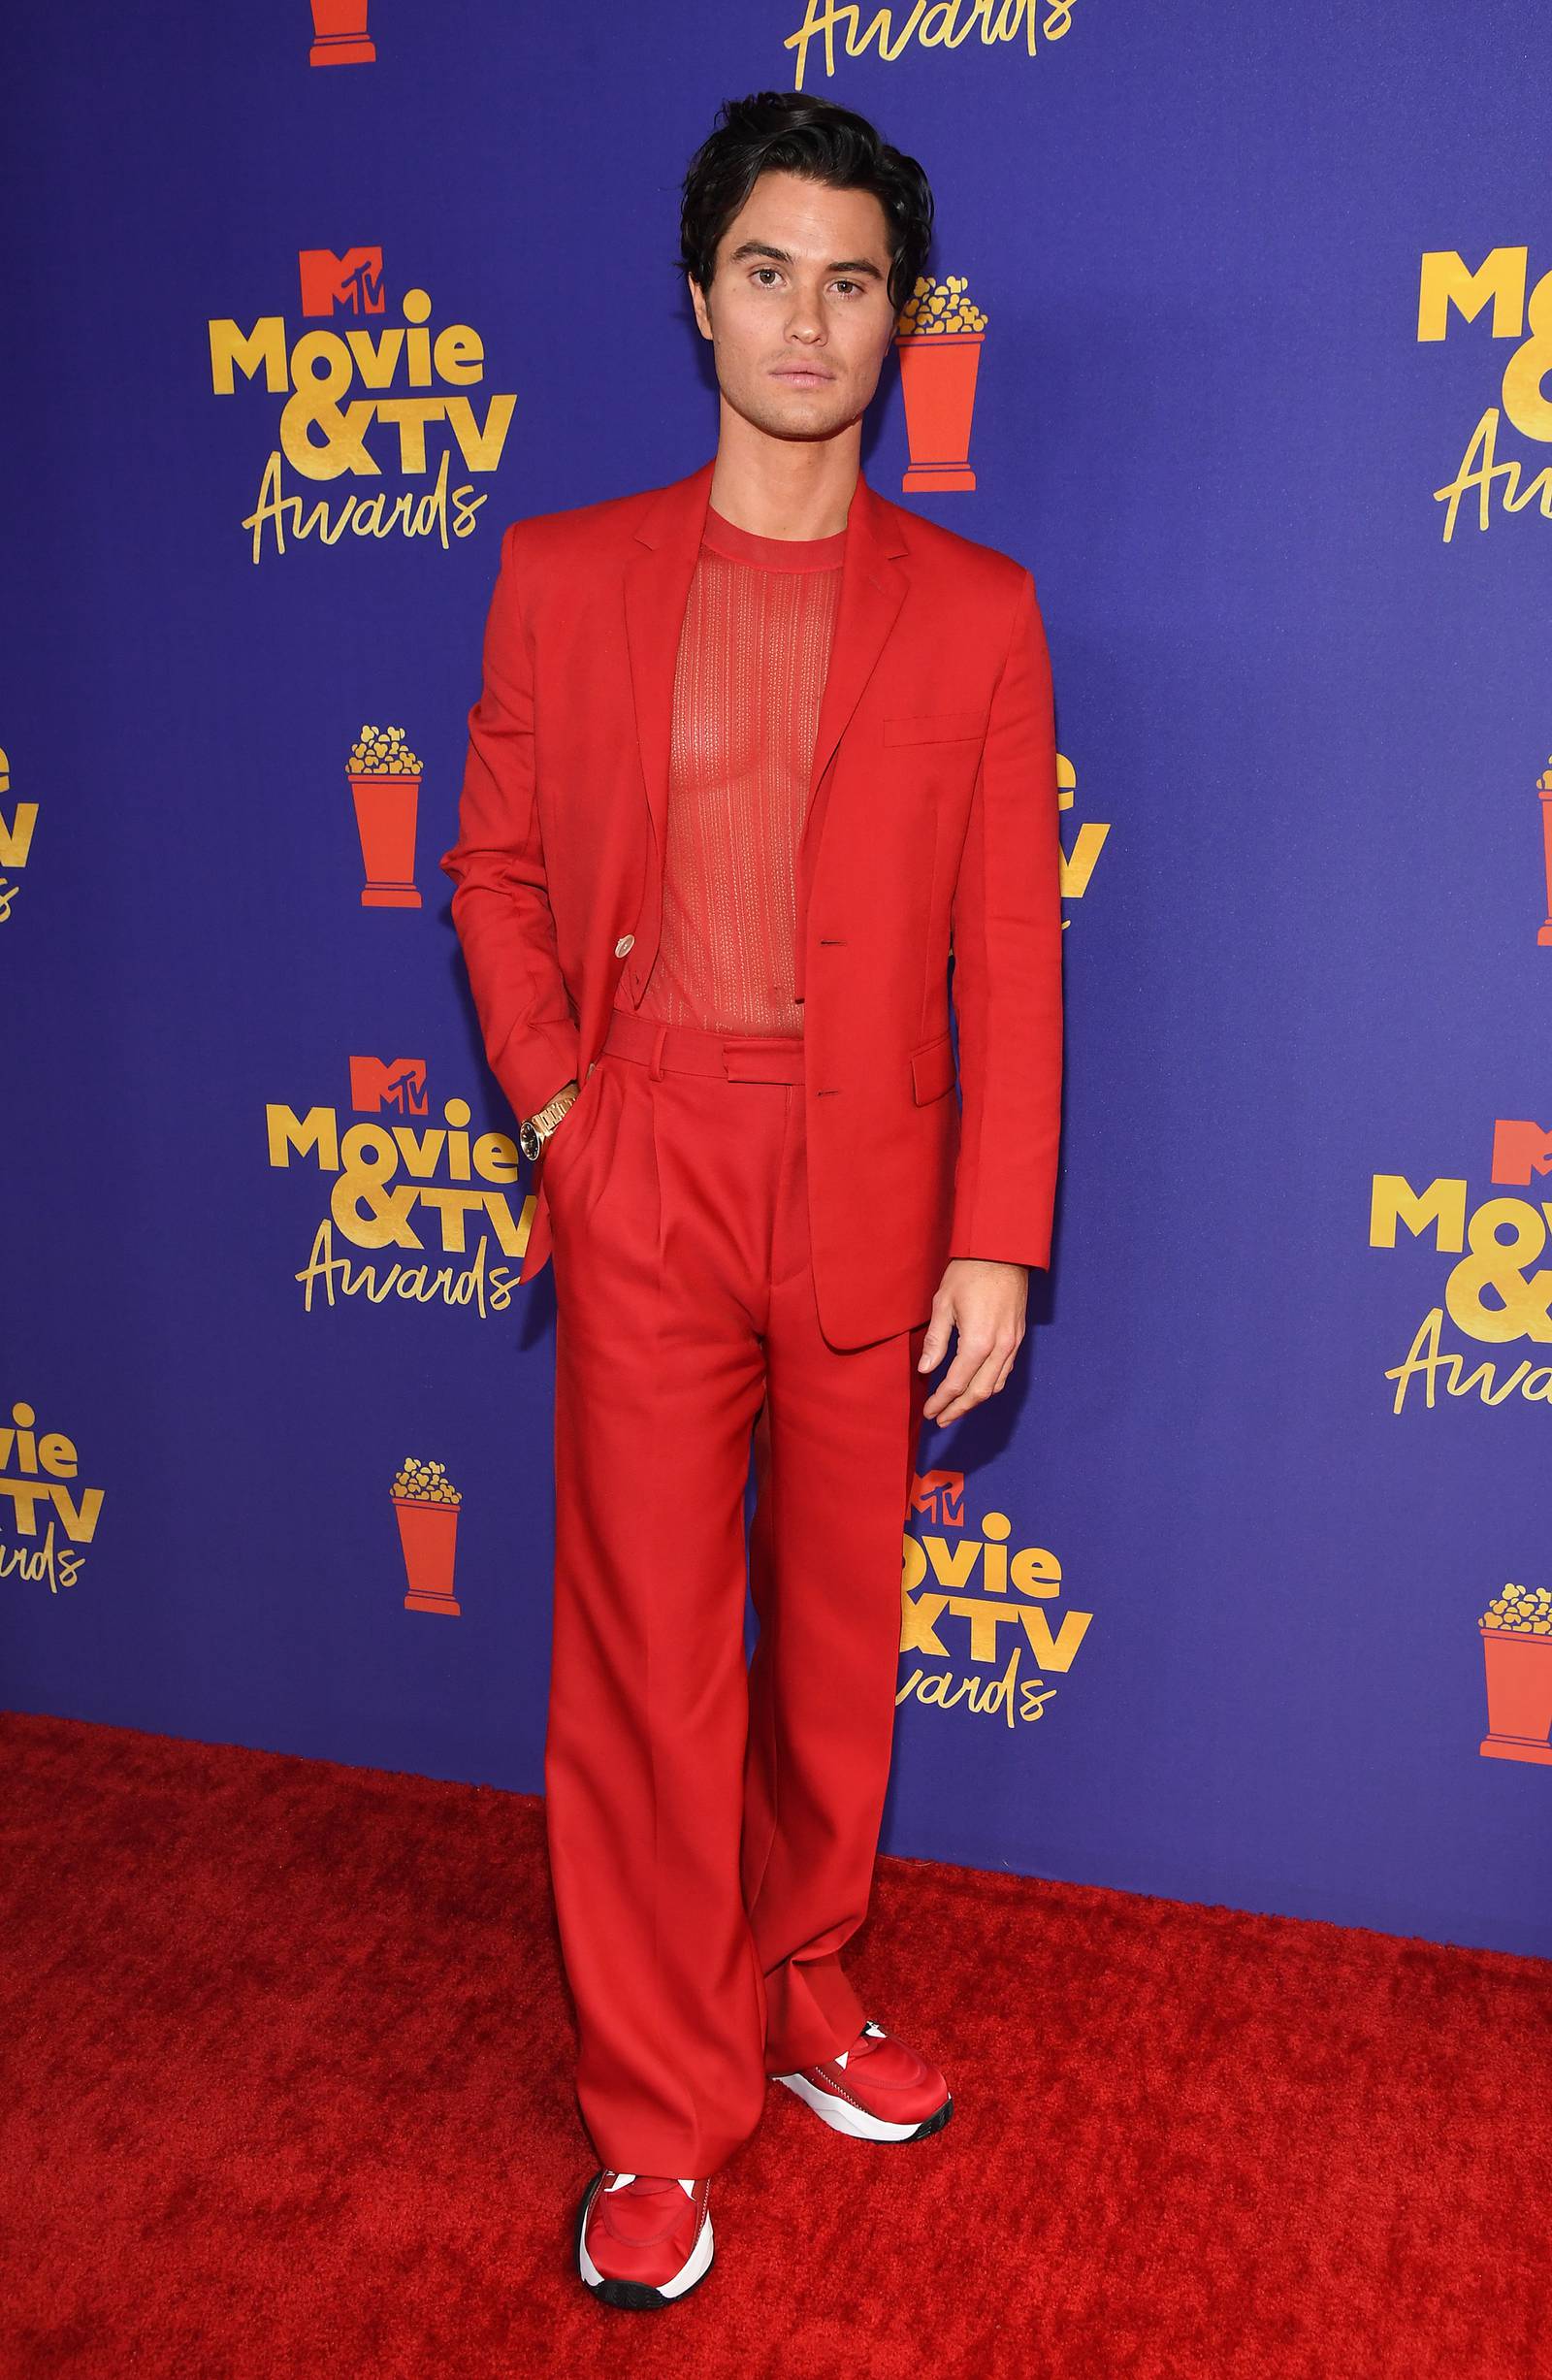 2021 MTV Movie & TV Awards See the complete winners list from night